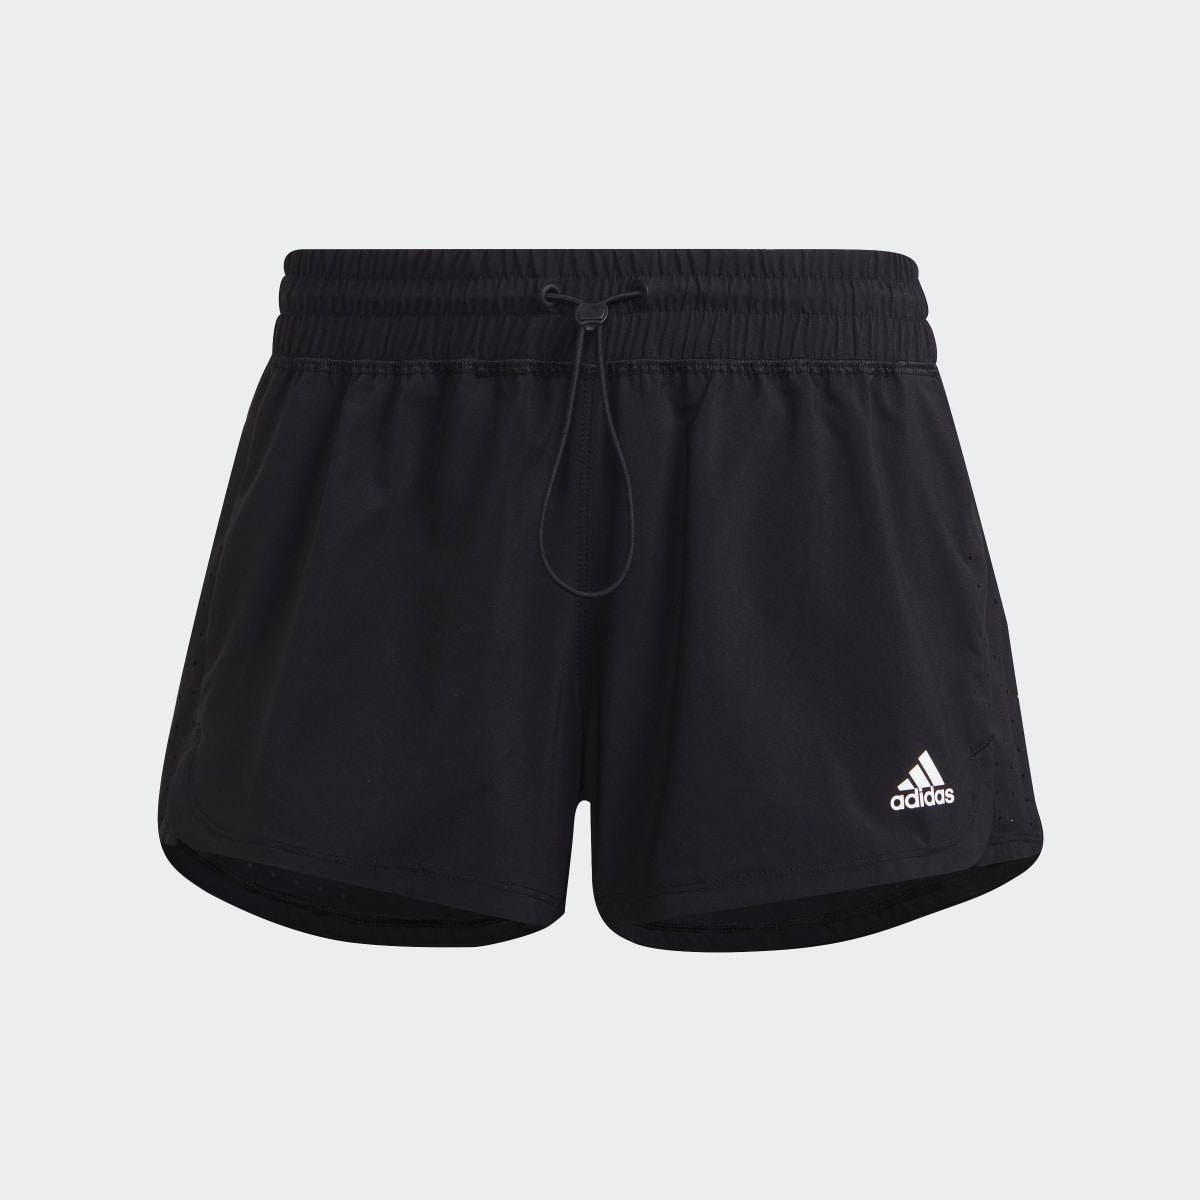 Adidas Perforated Pacer Shorts. 4